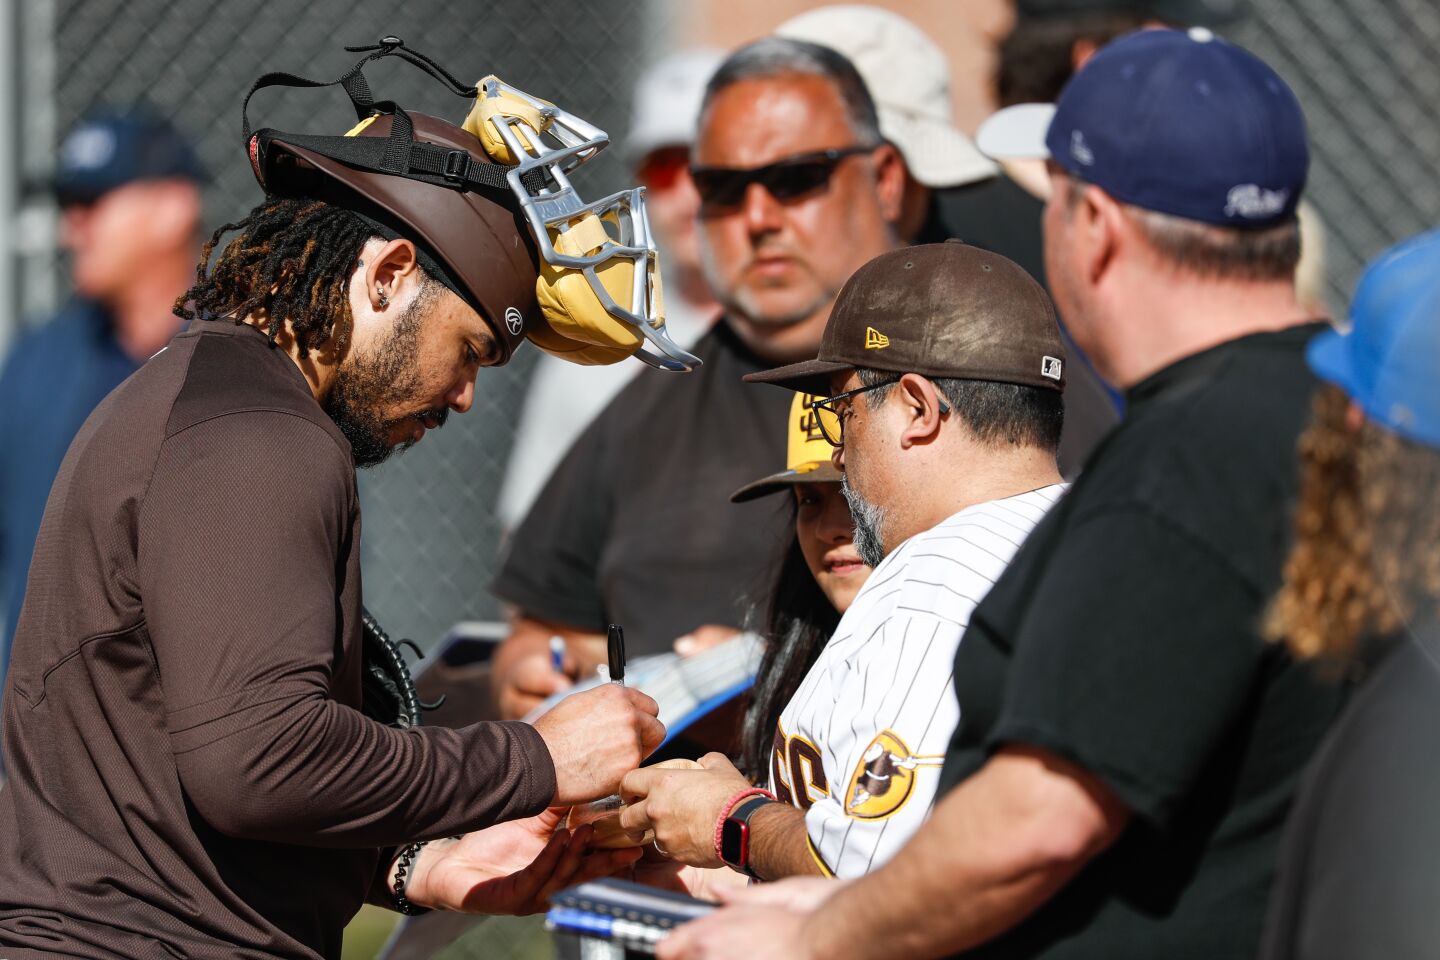 Padres catcher Luis Campusano (12) signs autographs for fans during a spring training practice at the Peoria Sports Complex on Sunday, Feb. 19, 2023 in Peoria, AZ.